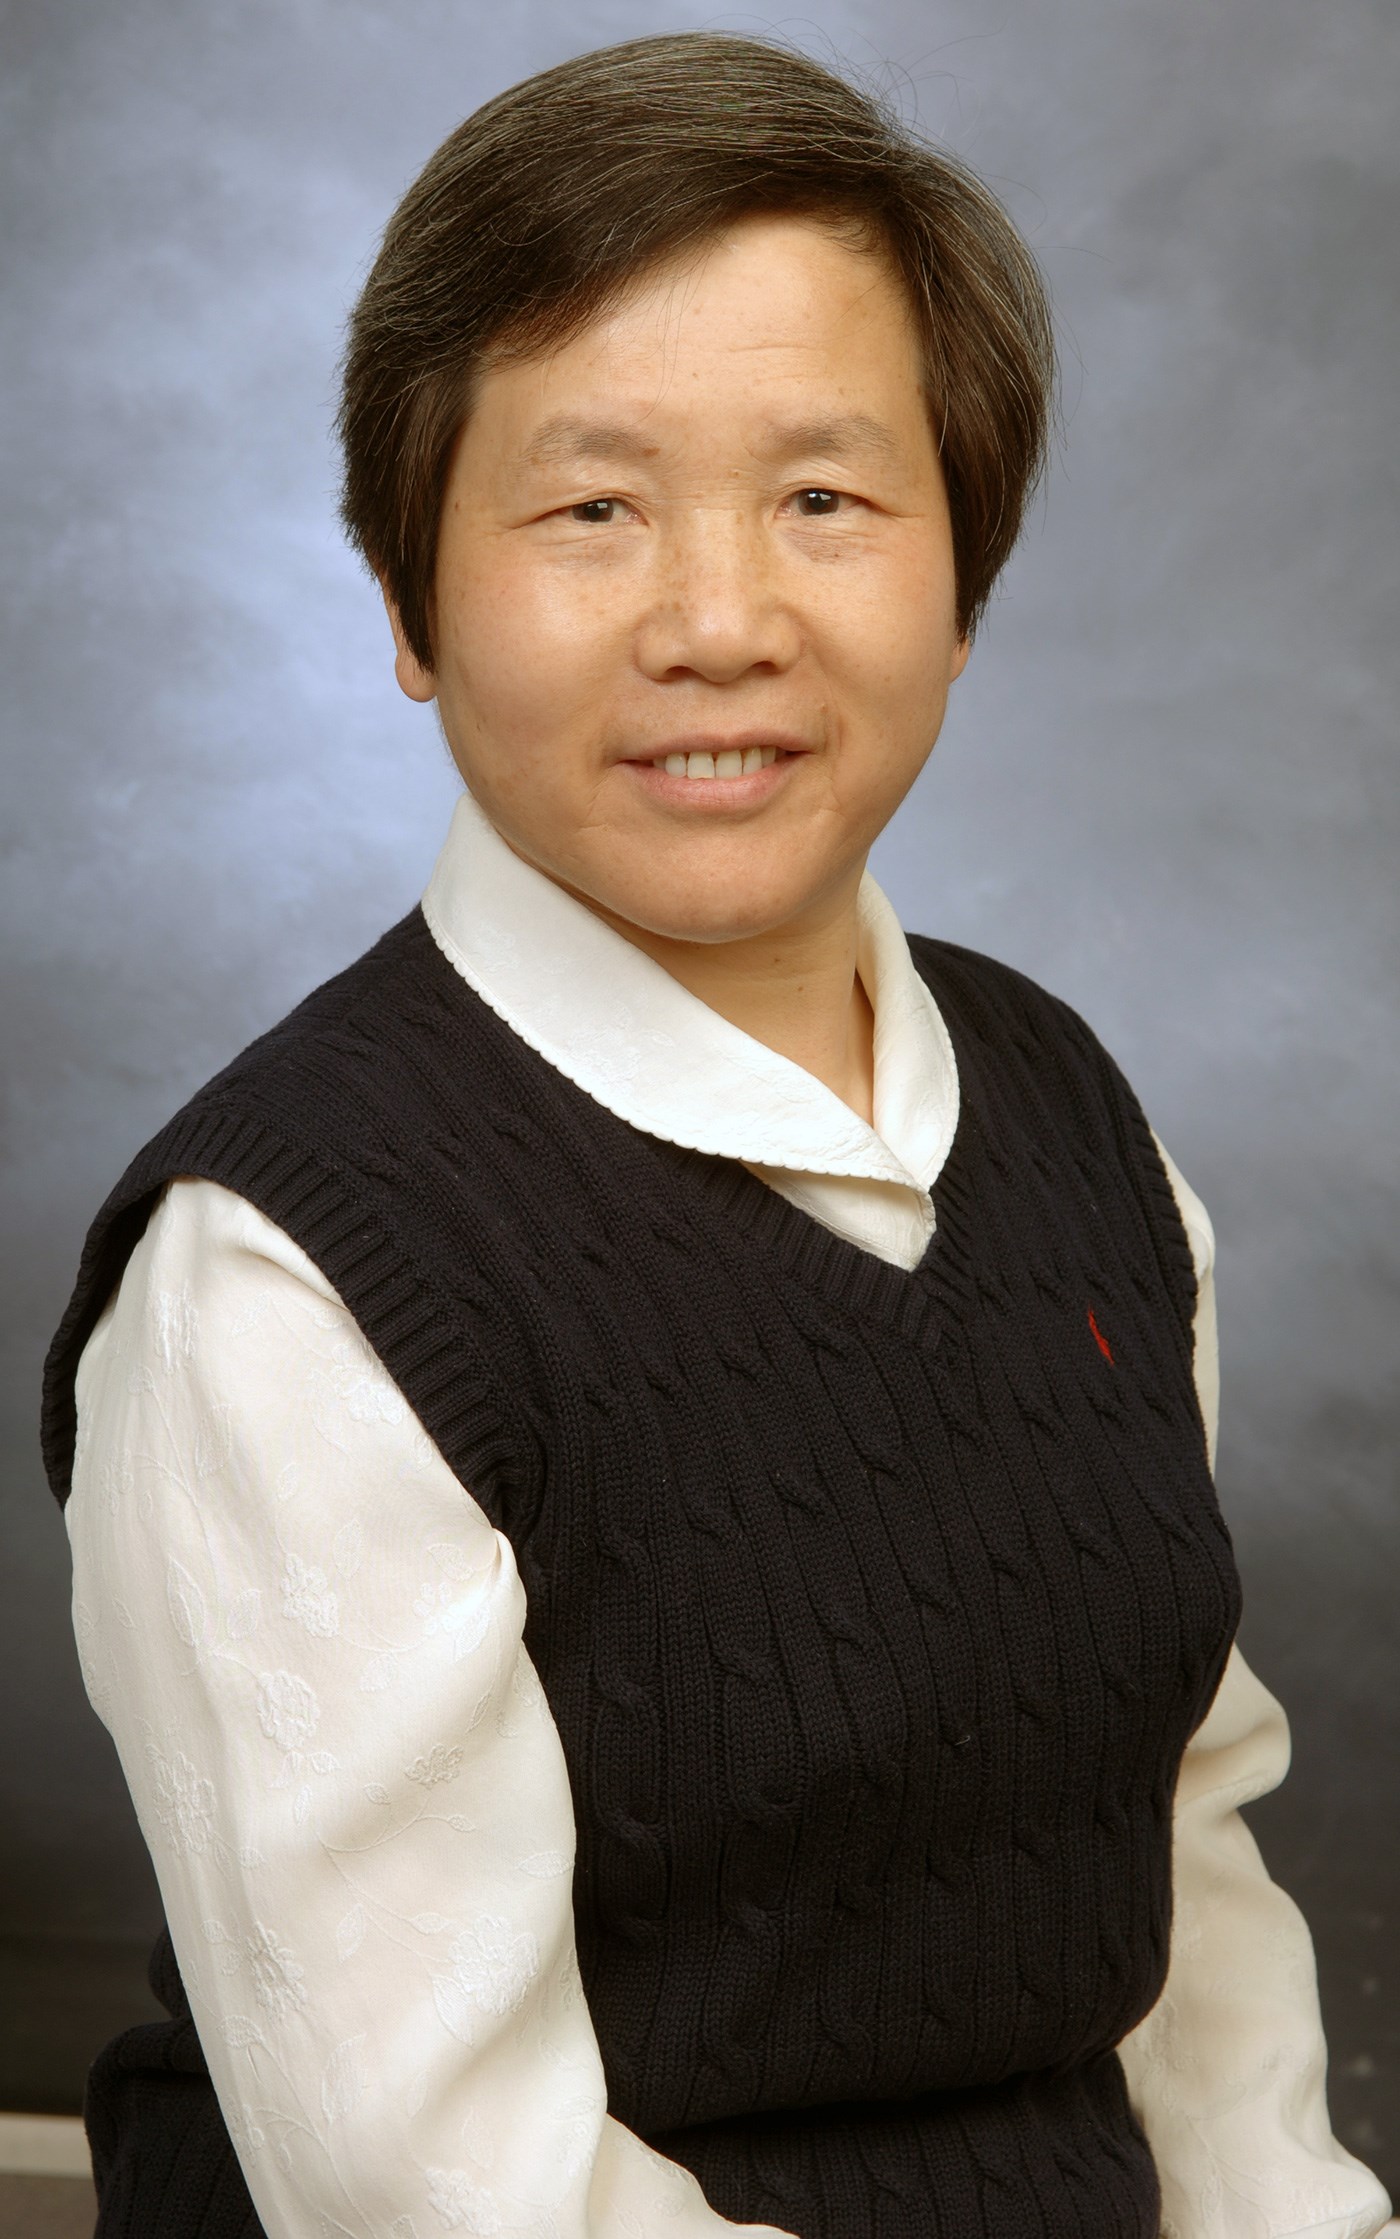 Shehong Chen is an Associate Professor in the History Department at UMass Lowell.